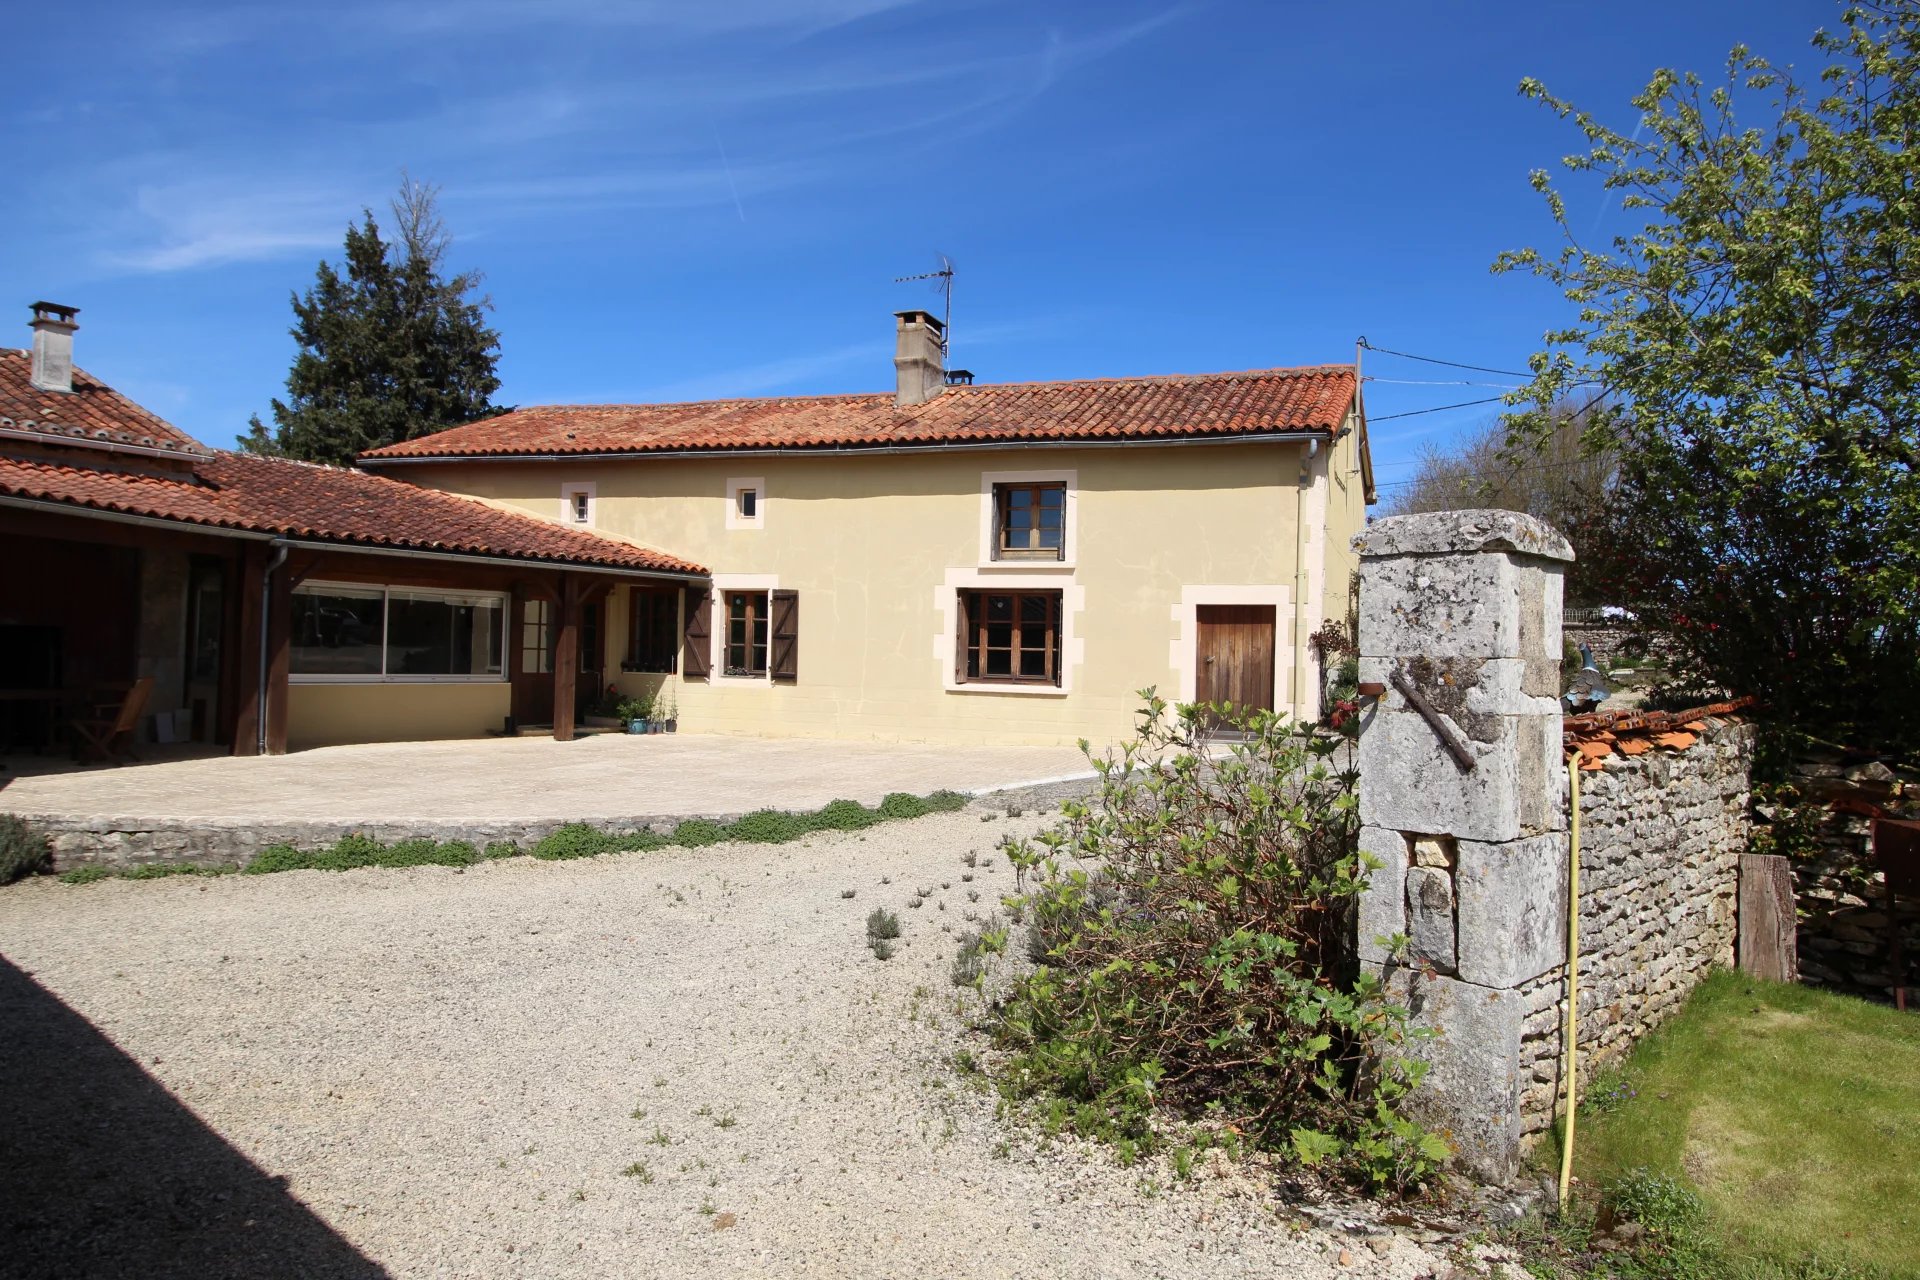 Detached country house with three bed gite, barns and land